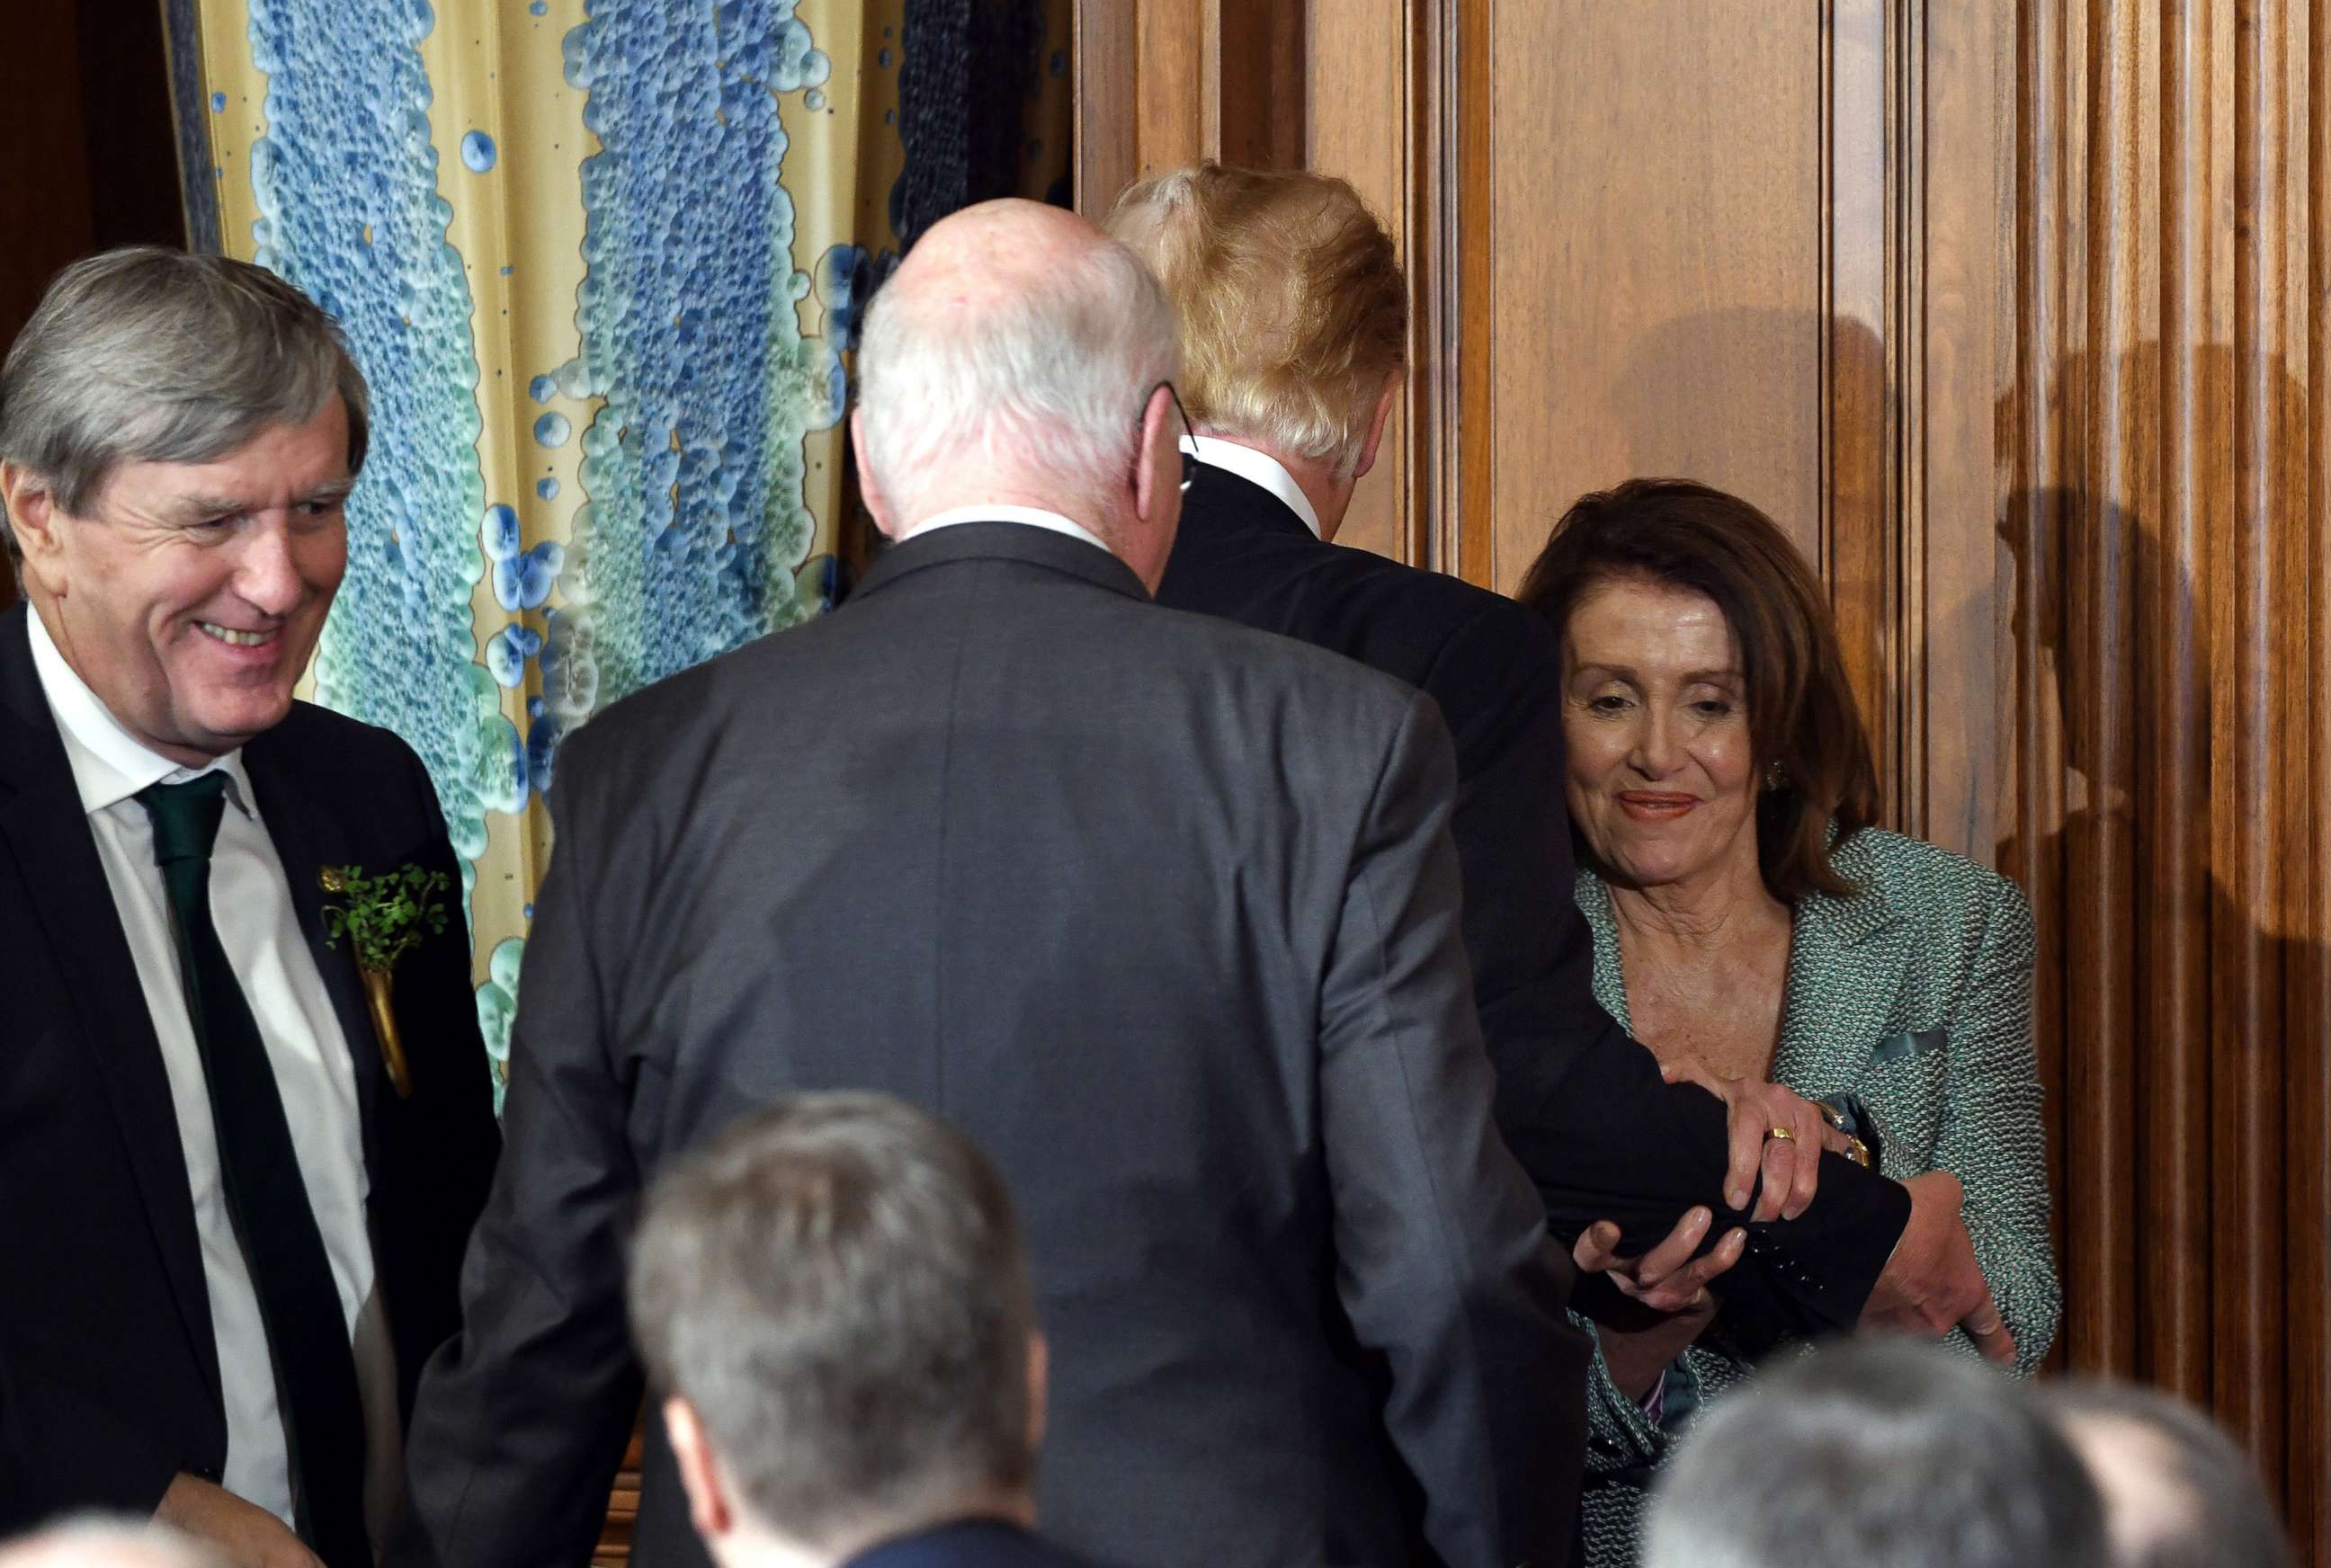 PHOTO: House Speaker Nancy Pelosi grips President Donald Trump's arm as the two pass at the Friends of Ireland Luncheon the Capitol on March 14, 2019, in Washington.